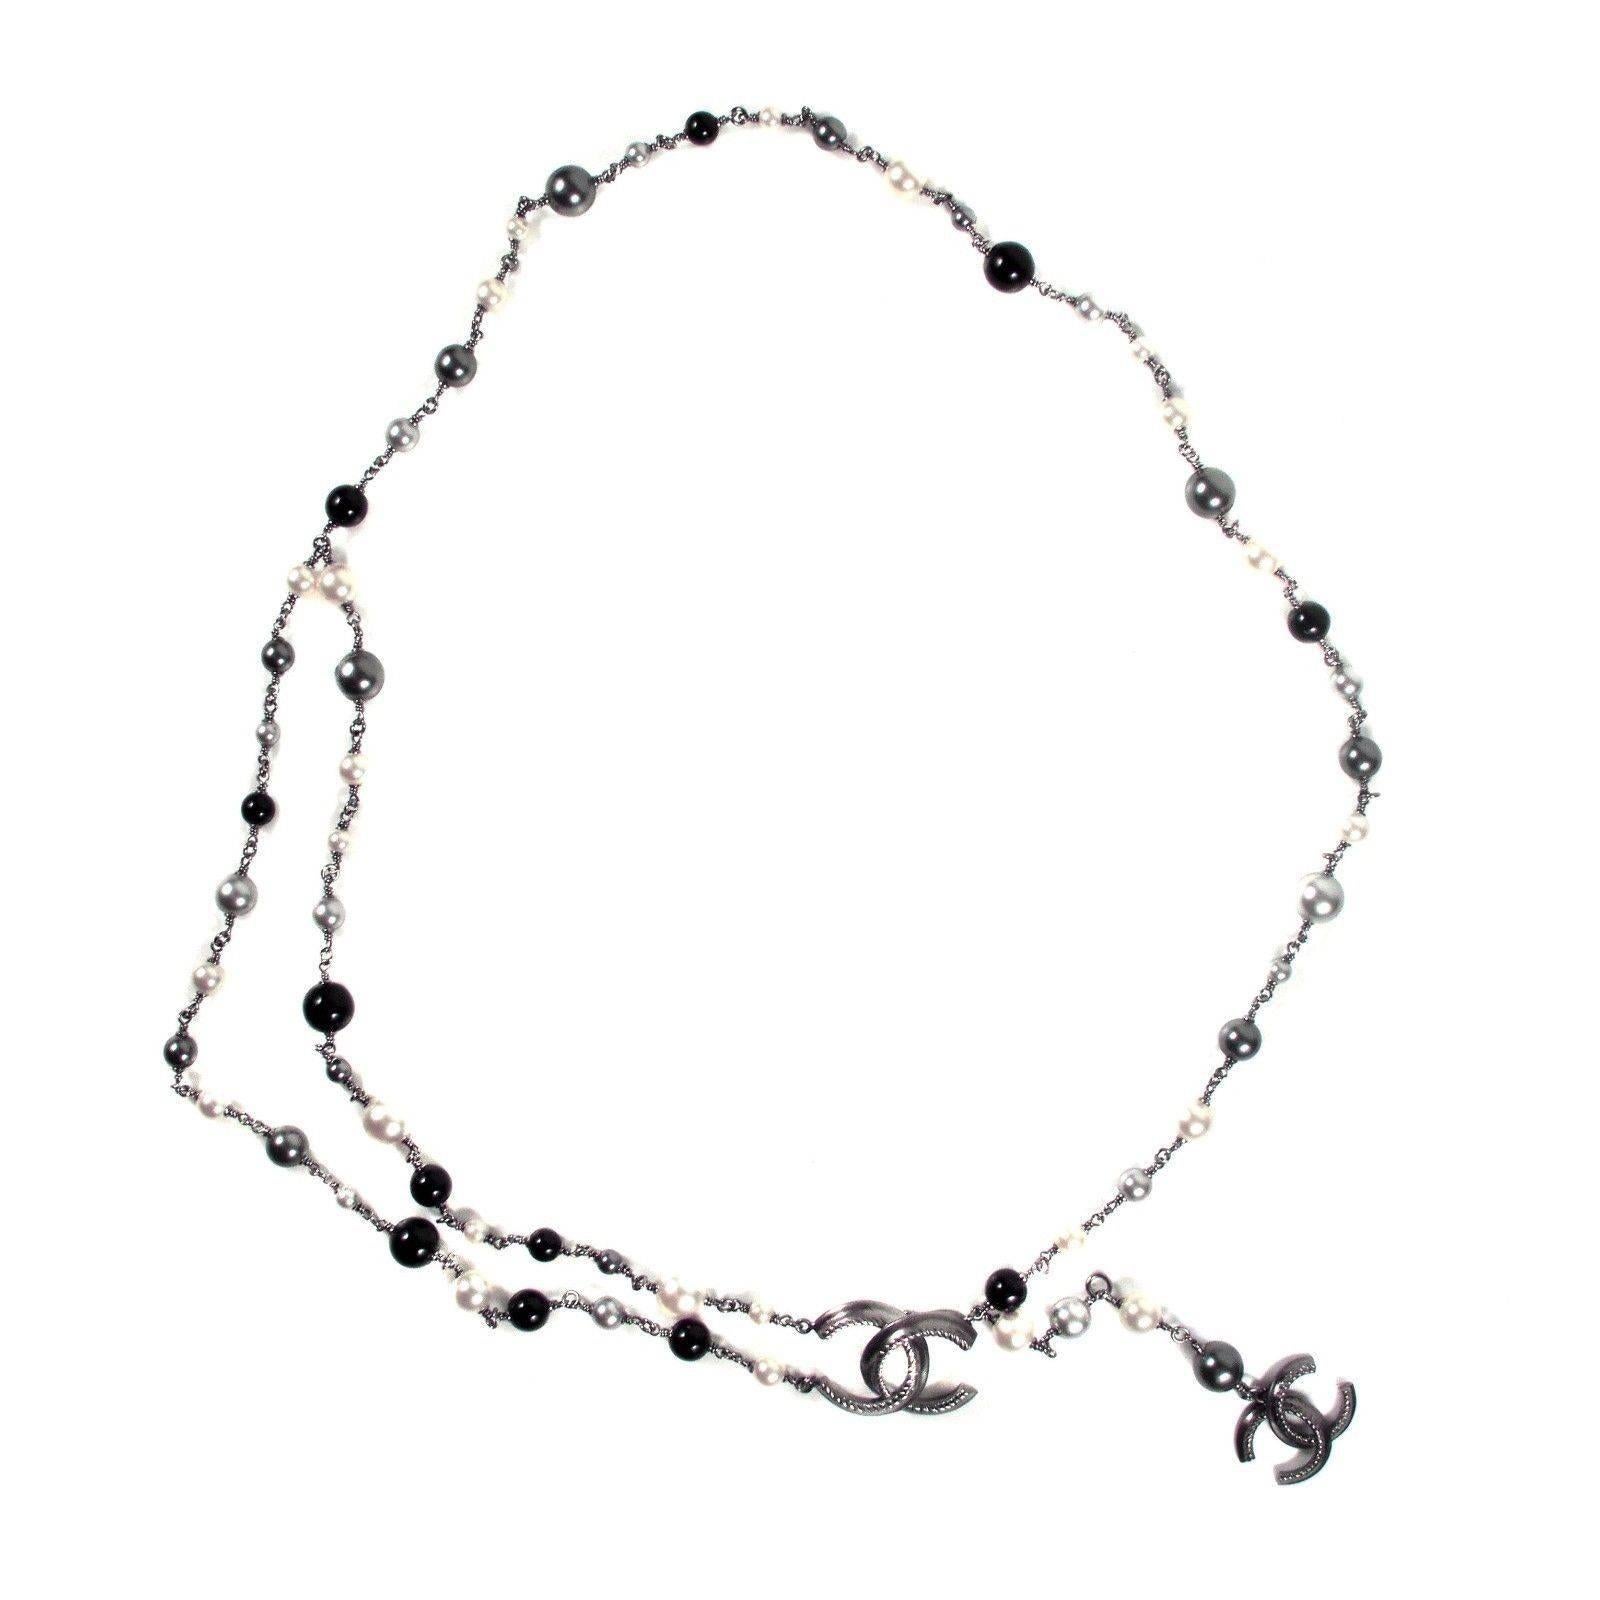 Chanel - Multicolor Necklace / Belt

Color: Black / Gray / White

Material: Metal / Pearl Beads

------------------------------------------------------------

Details:

- silver tone hardware

- CC logo charm

- hook eye clasp